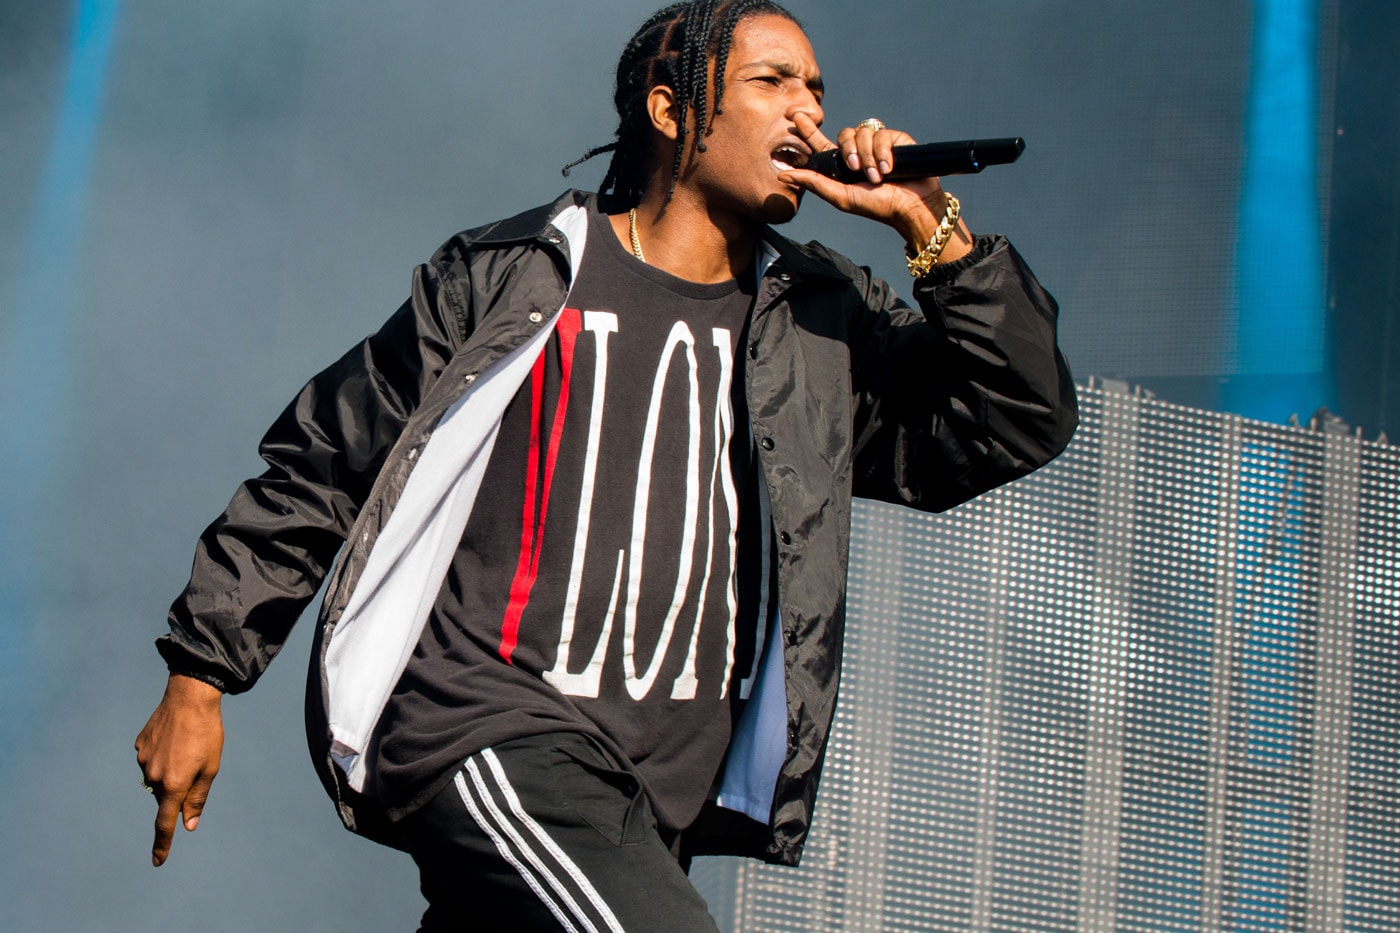 Watch the Trippy Video for A$AP Rocky's Kanye West-Featured "Jukebox Joints"